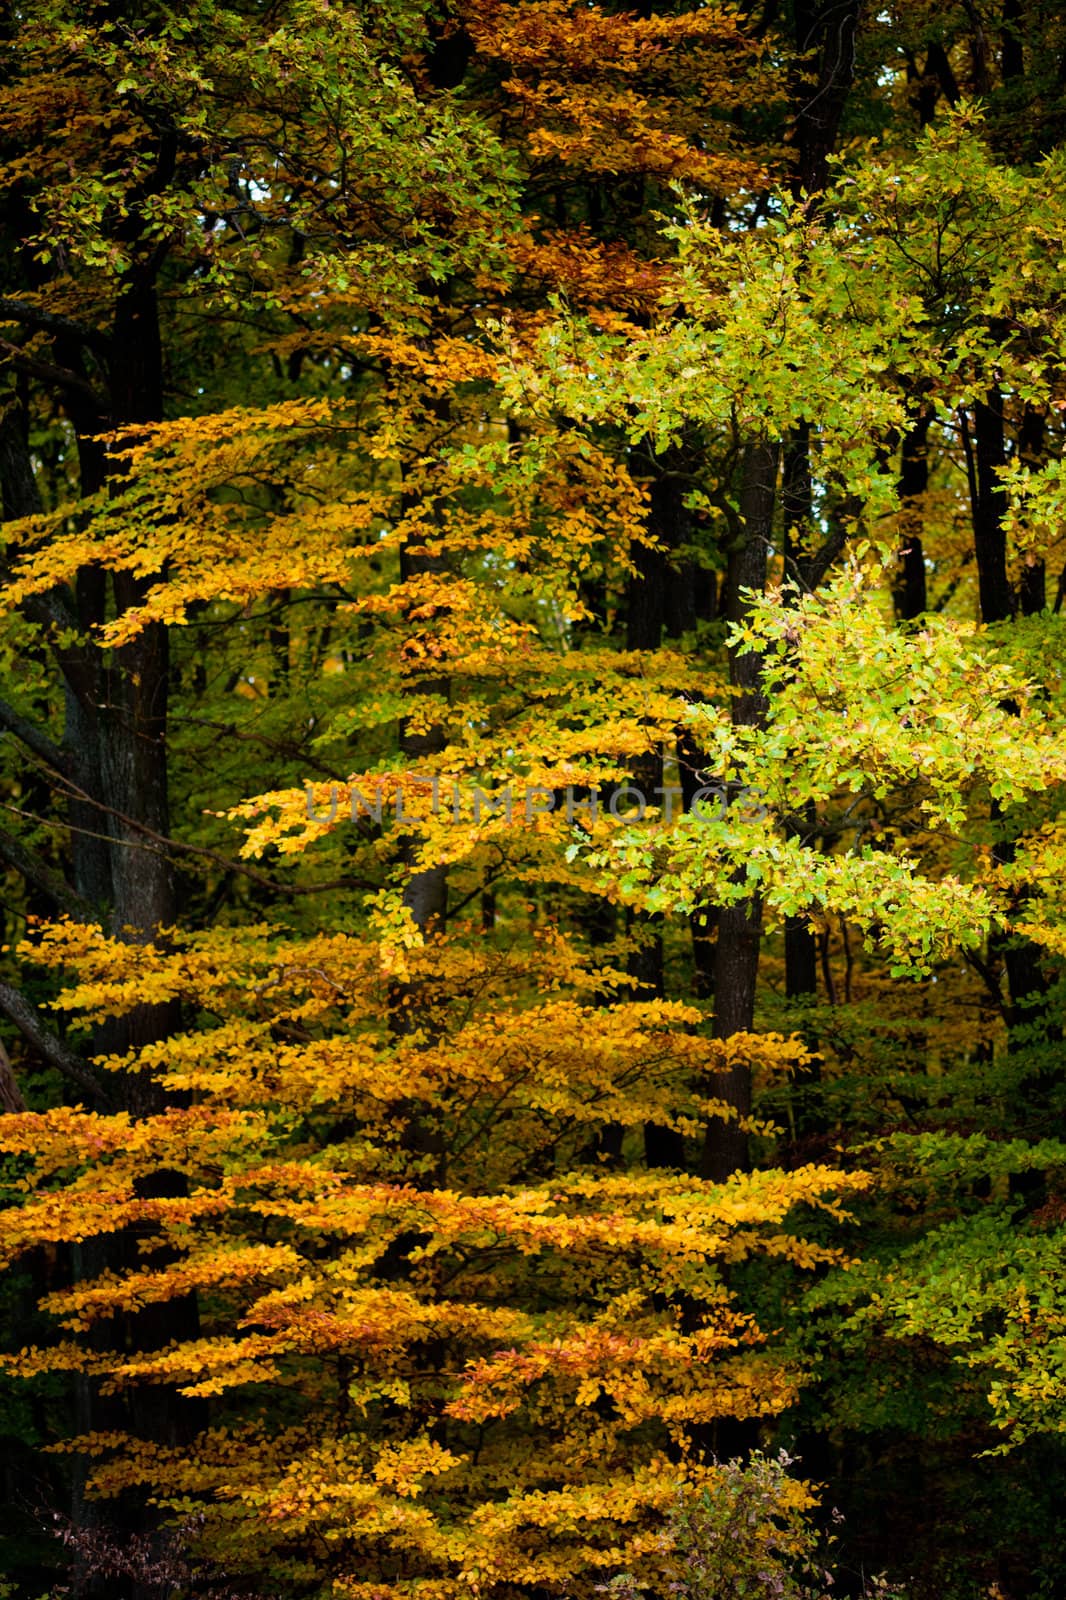 Golden peak of fall colored deciduous forest in October.